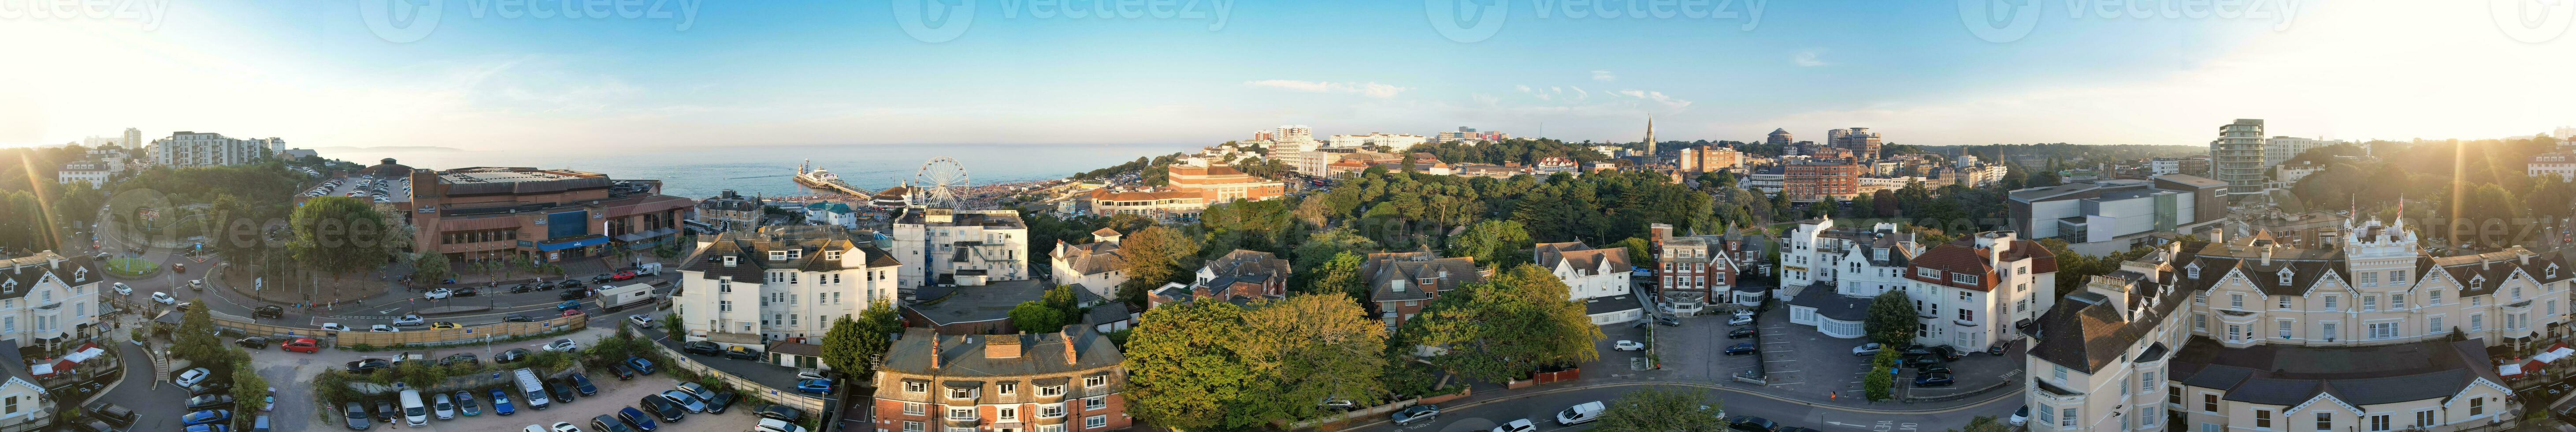 Aerial Panoramic View of British Tourist Attraction at Sea View of Bournemouth City of England Great Britain UK. High Angle Image Captured with Drone's Camera on September 9th, 2023 During Sunset photo